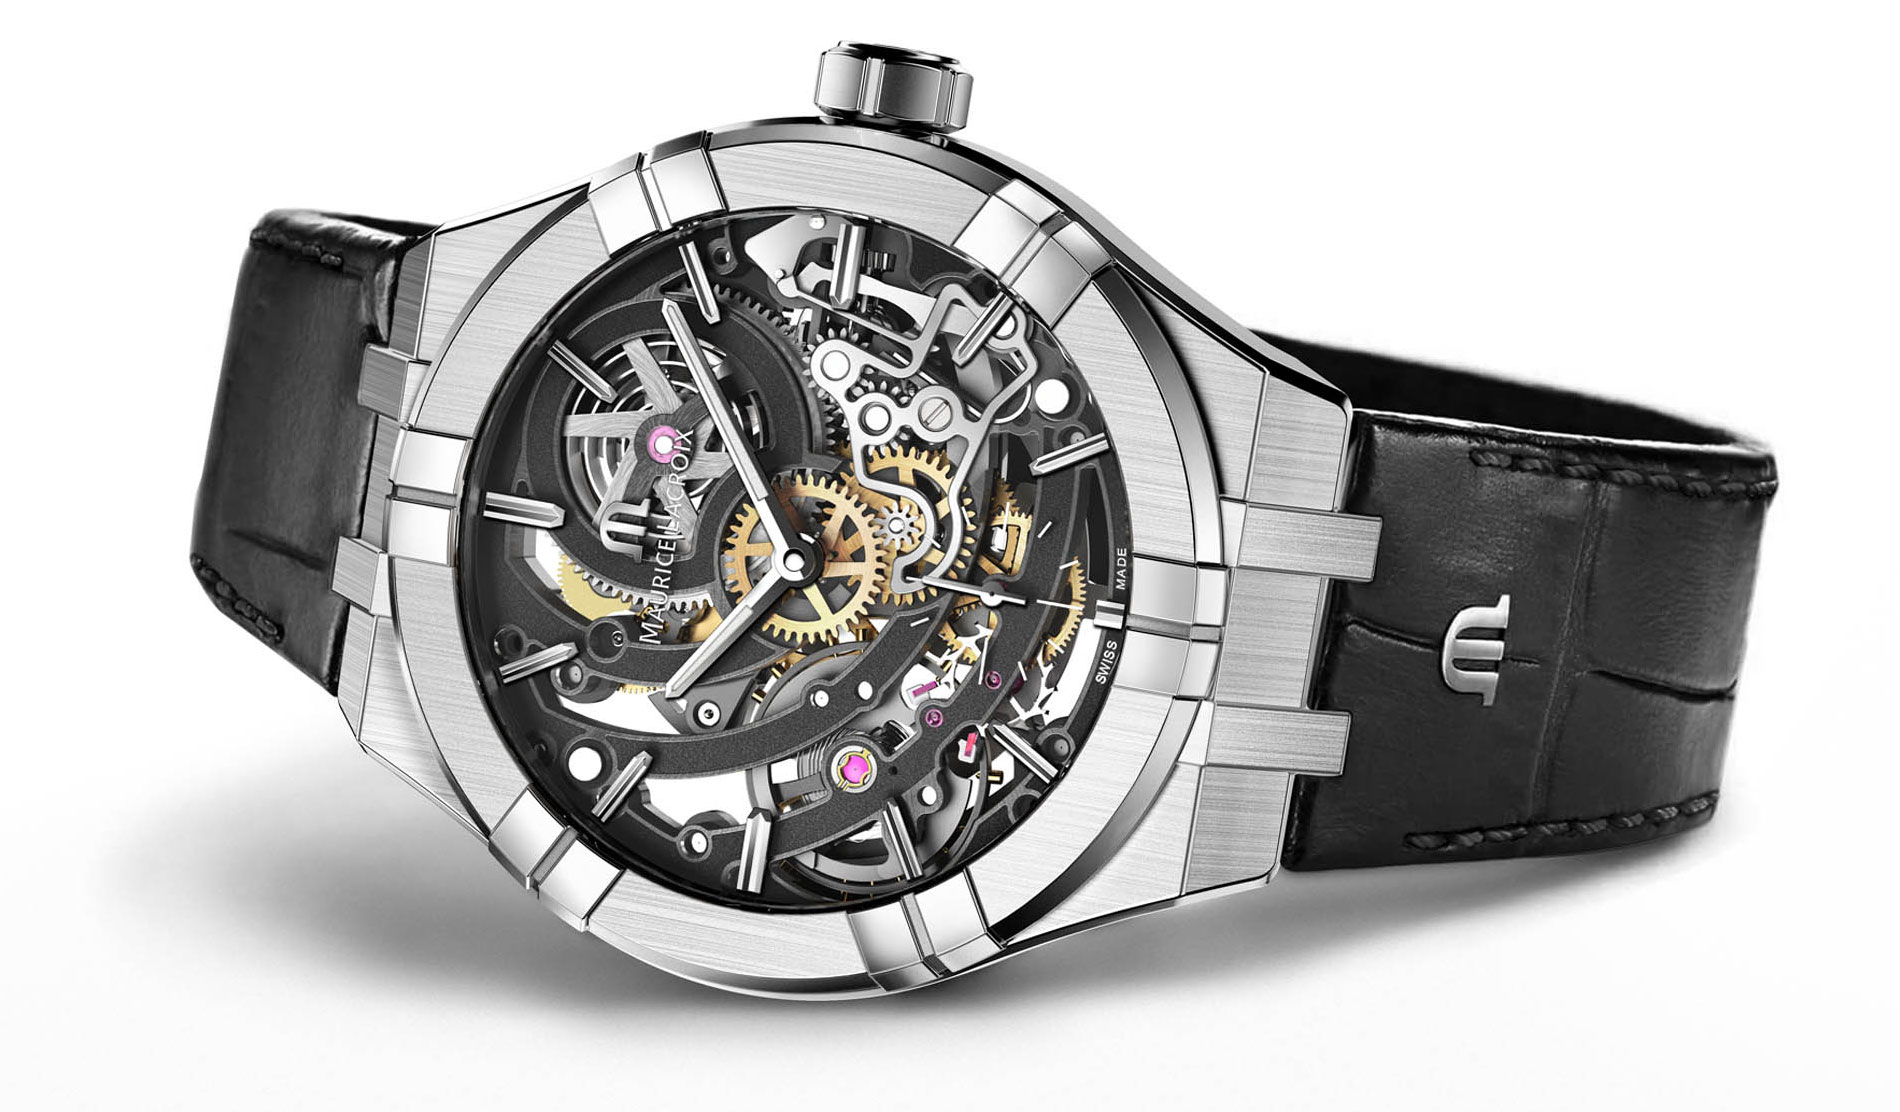 THE AIKON AUTOMATIC SKELETON – THE UNIQUE IMPACT OF A GRAPHIC SKELETON